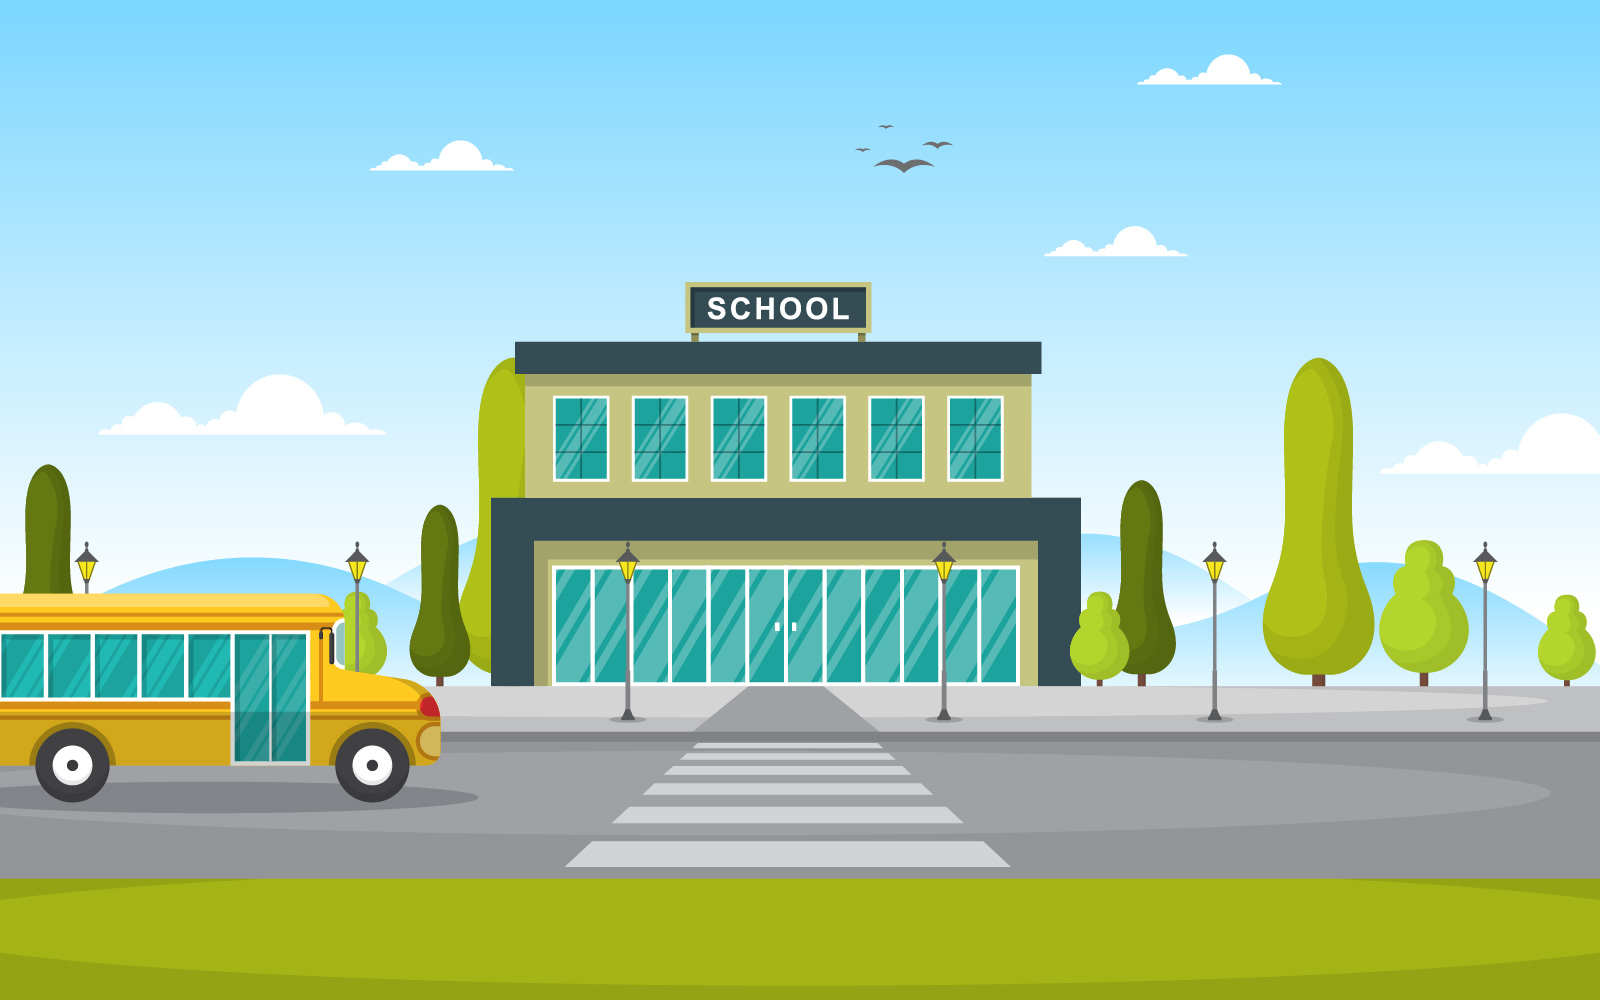 School Building with Bus - Illustration